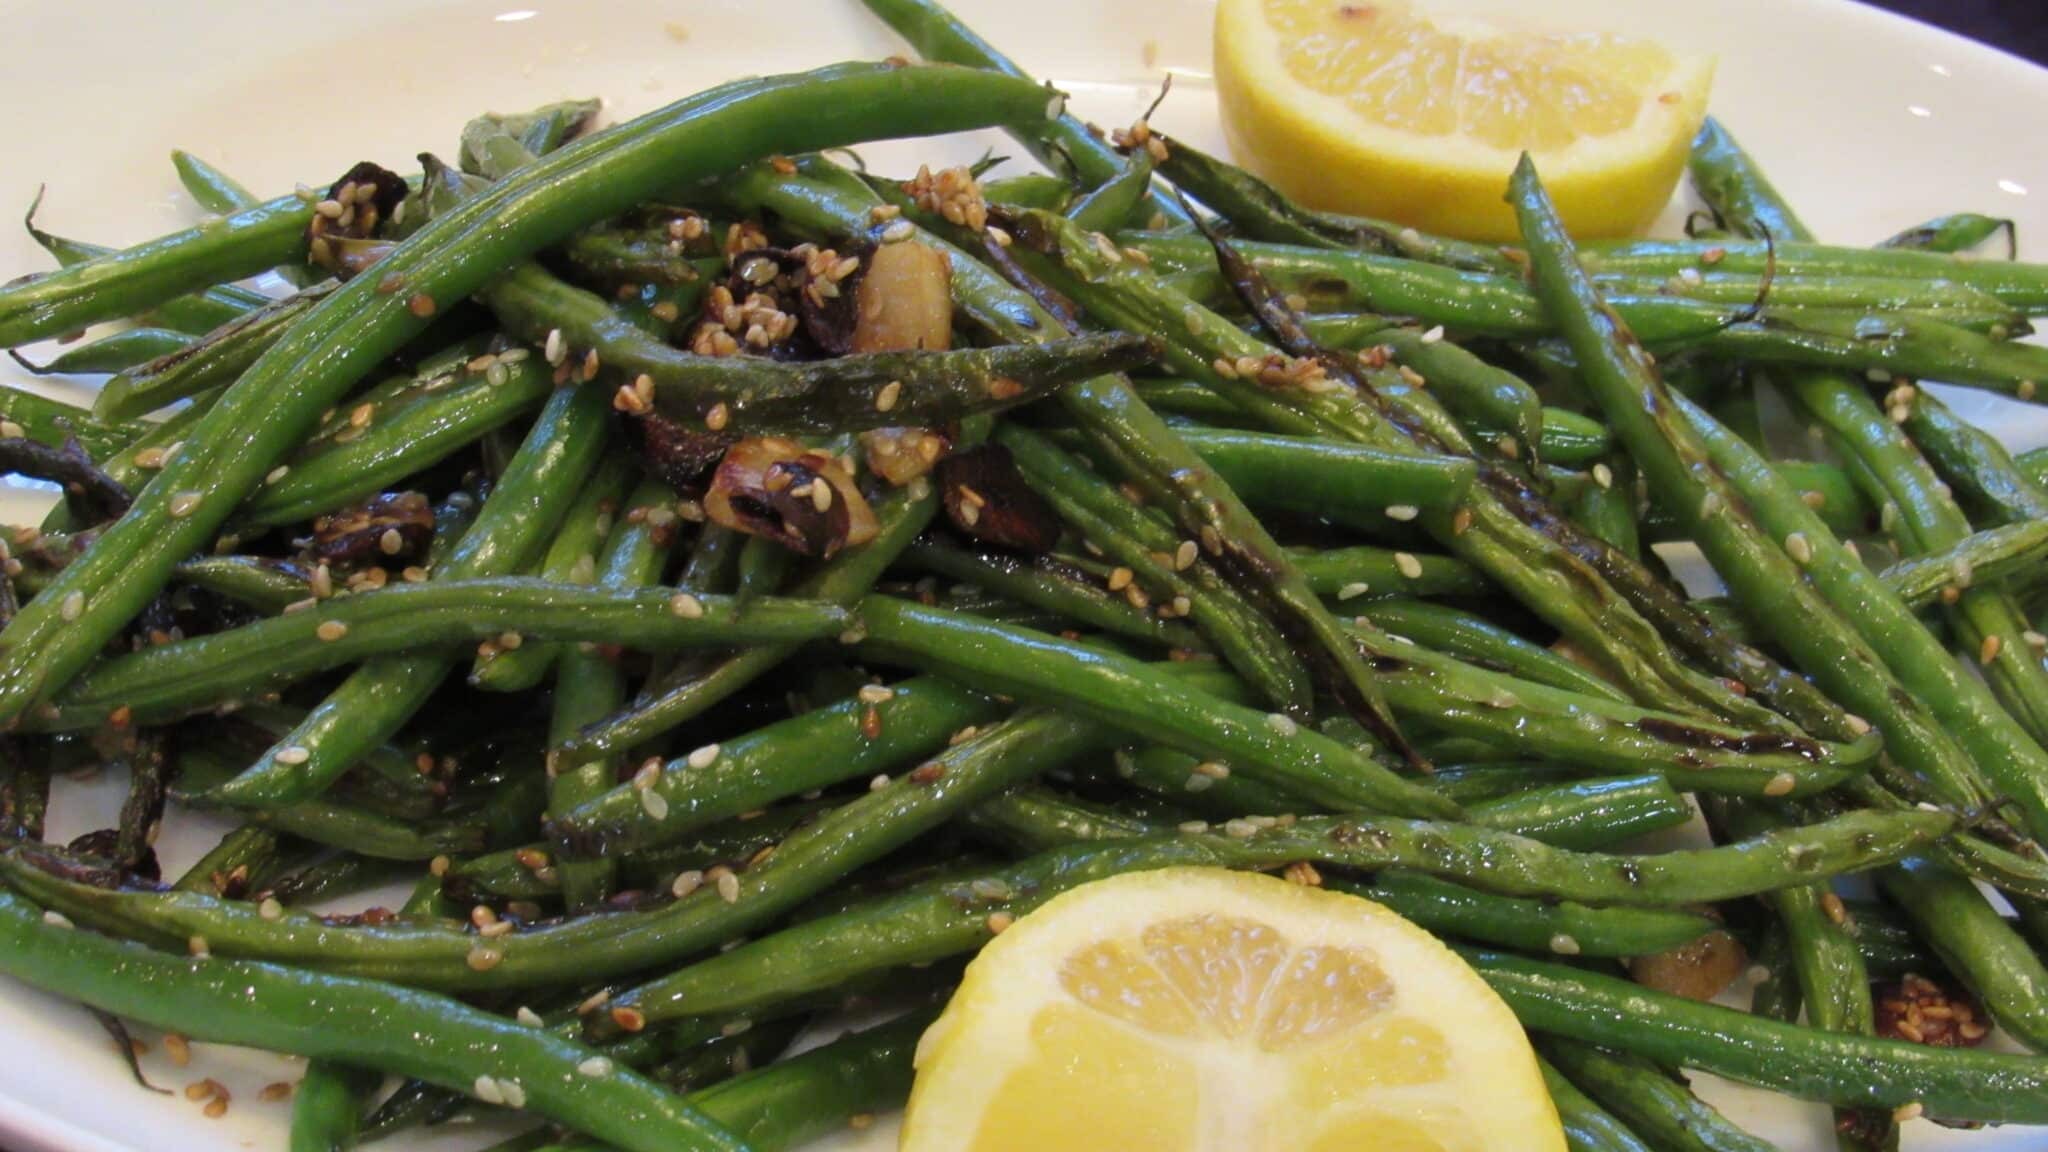 Green beans are garnished with fresh lemon juice and served on a white plate.